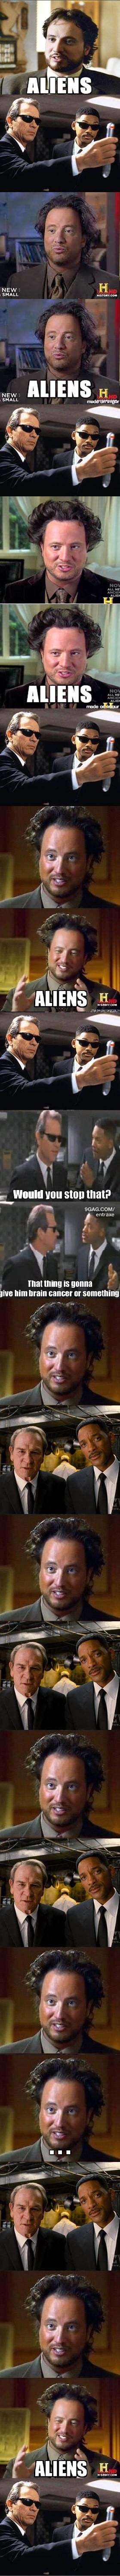 The Men in Black try to stop the 'Aliens' guy